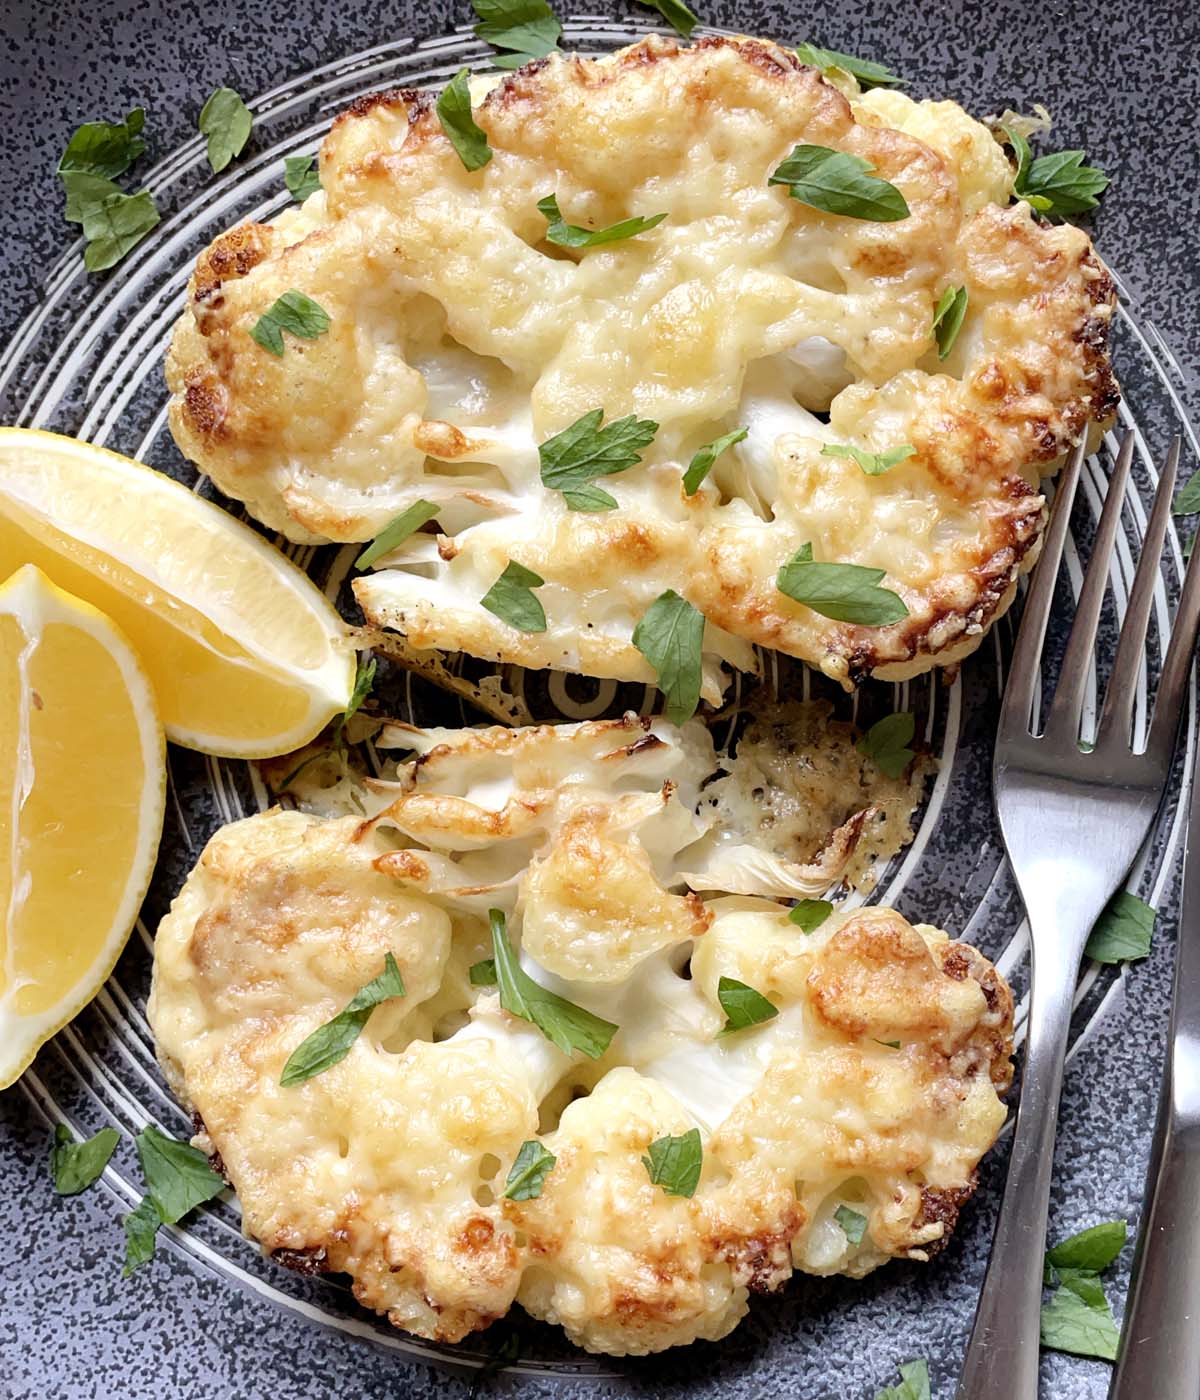 Two parmesan roasted cauliflower steaks, two lemon wedges, and a fork and knife on a dark round plate.